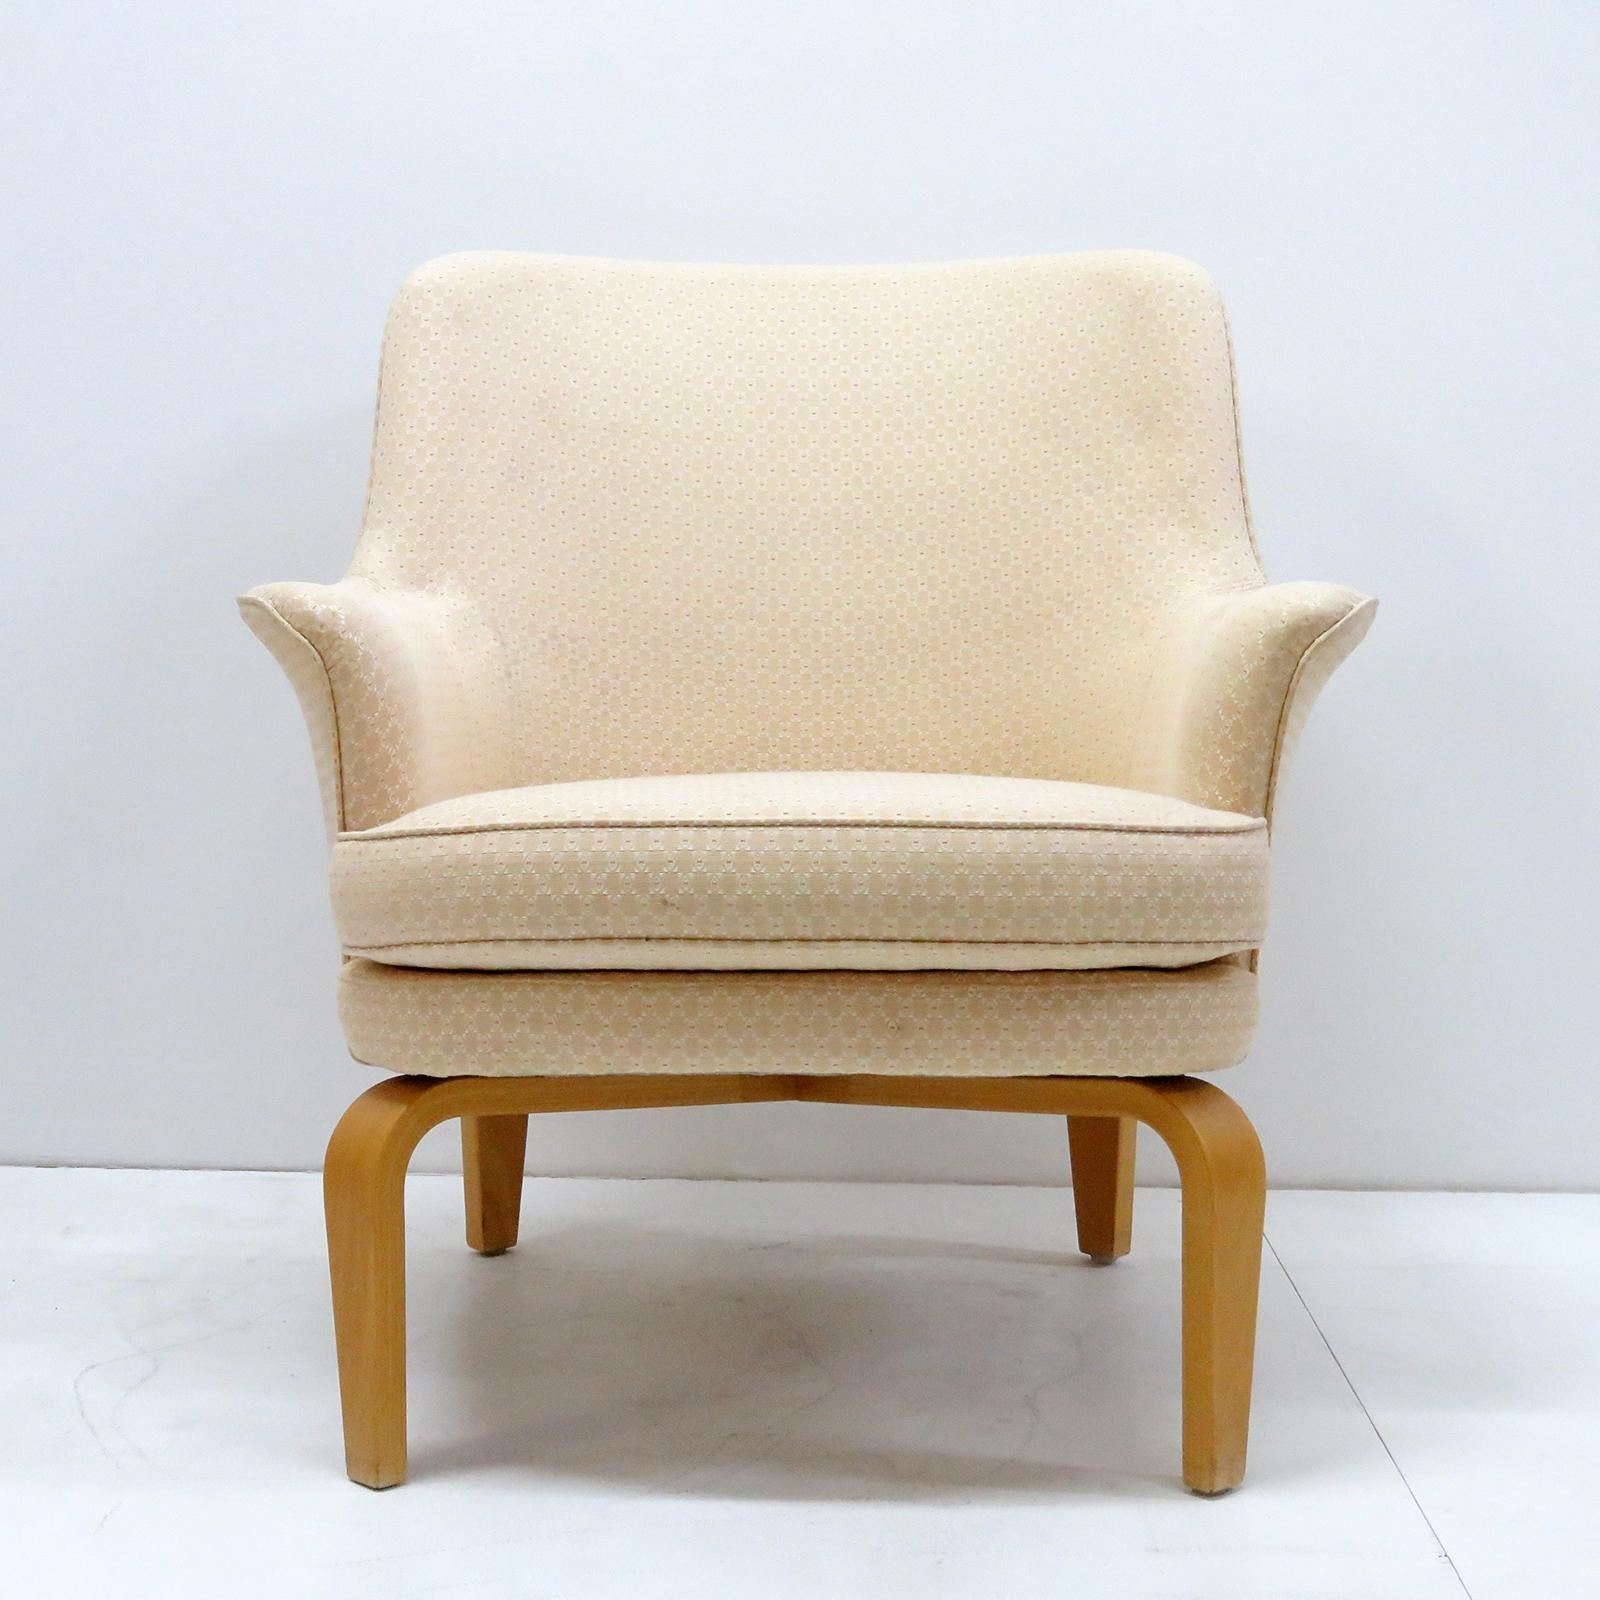 Wonderful easy chairs, model 'Pilot' designed by Arne Norell in the early 1970s and produced by Norell Möbel AB, Sweden, with beige upholstery with minimal geometric pattern on birch wood legs, marked, priced individually.